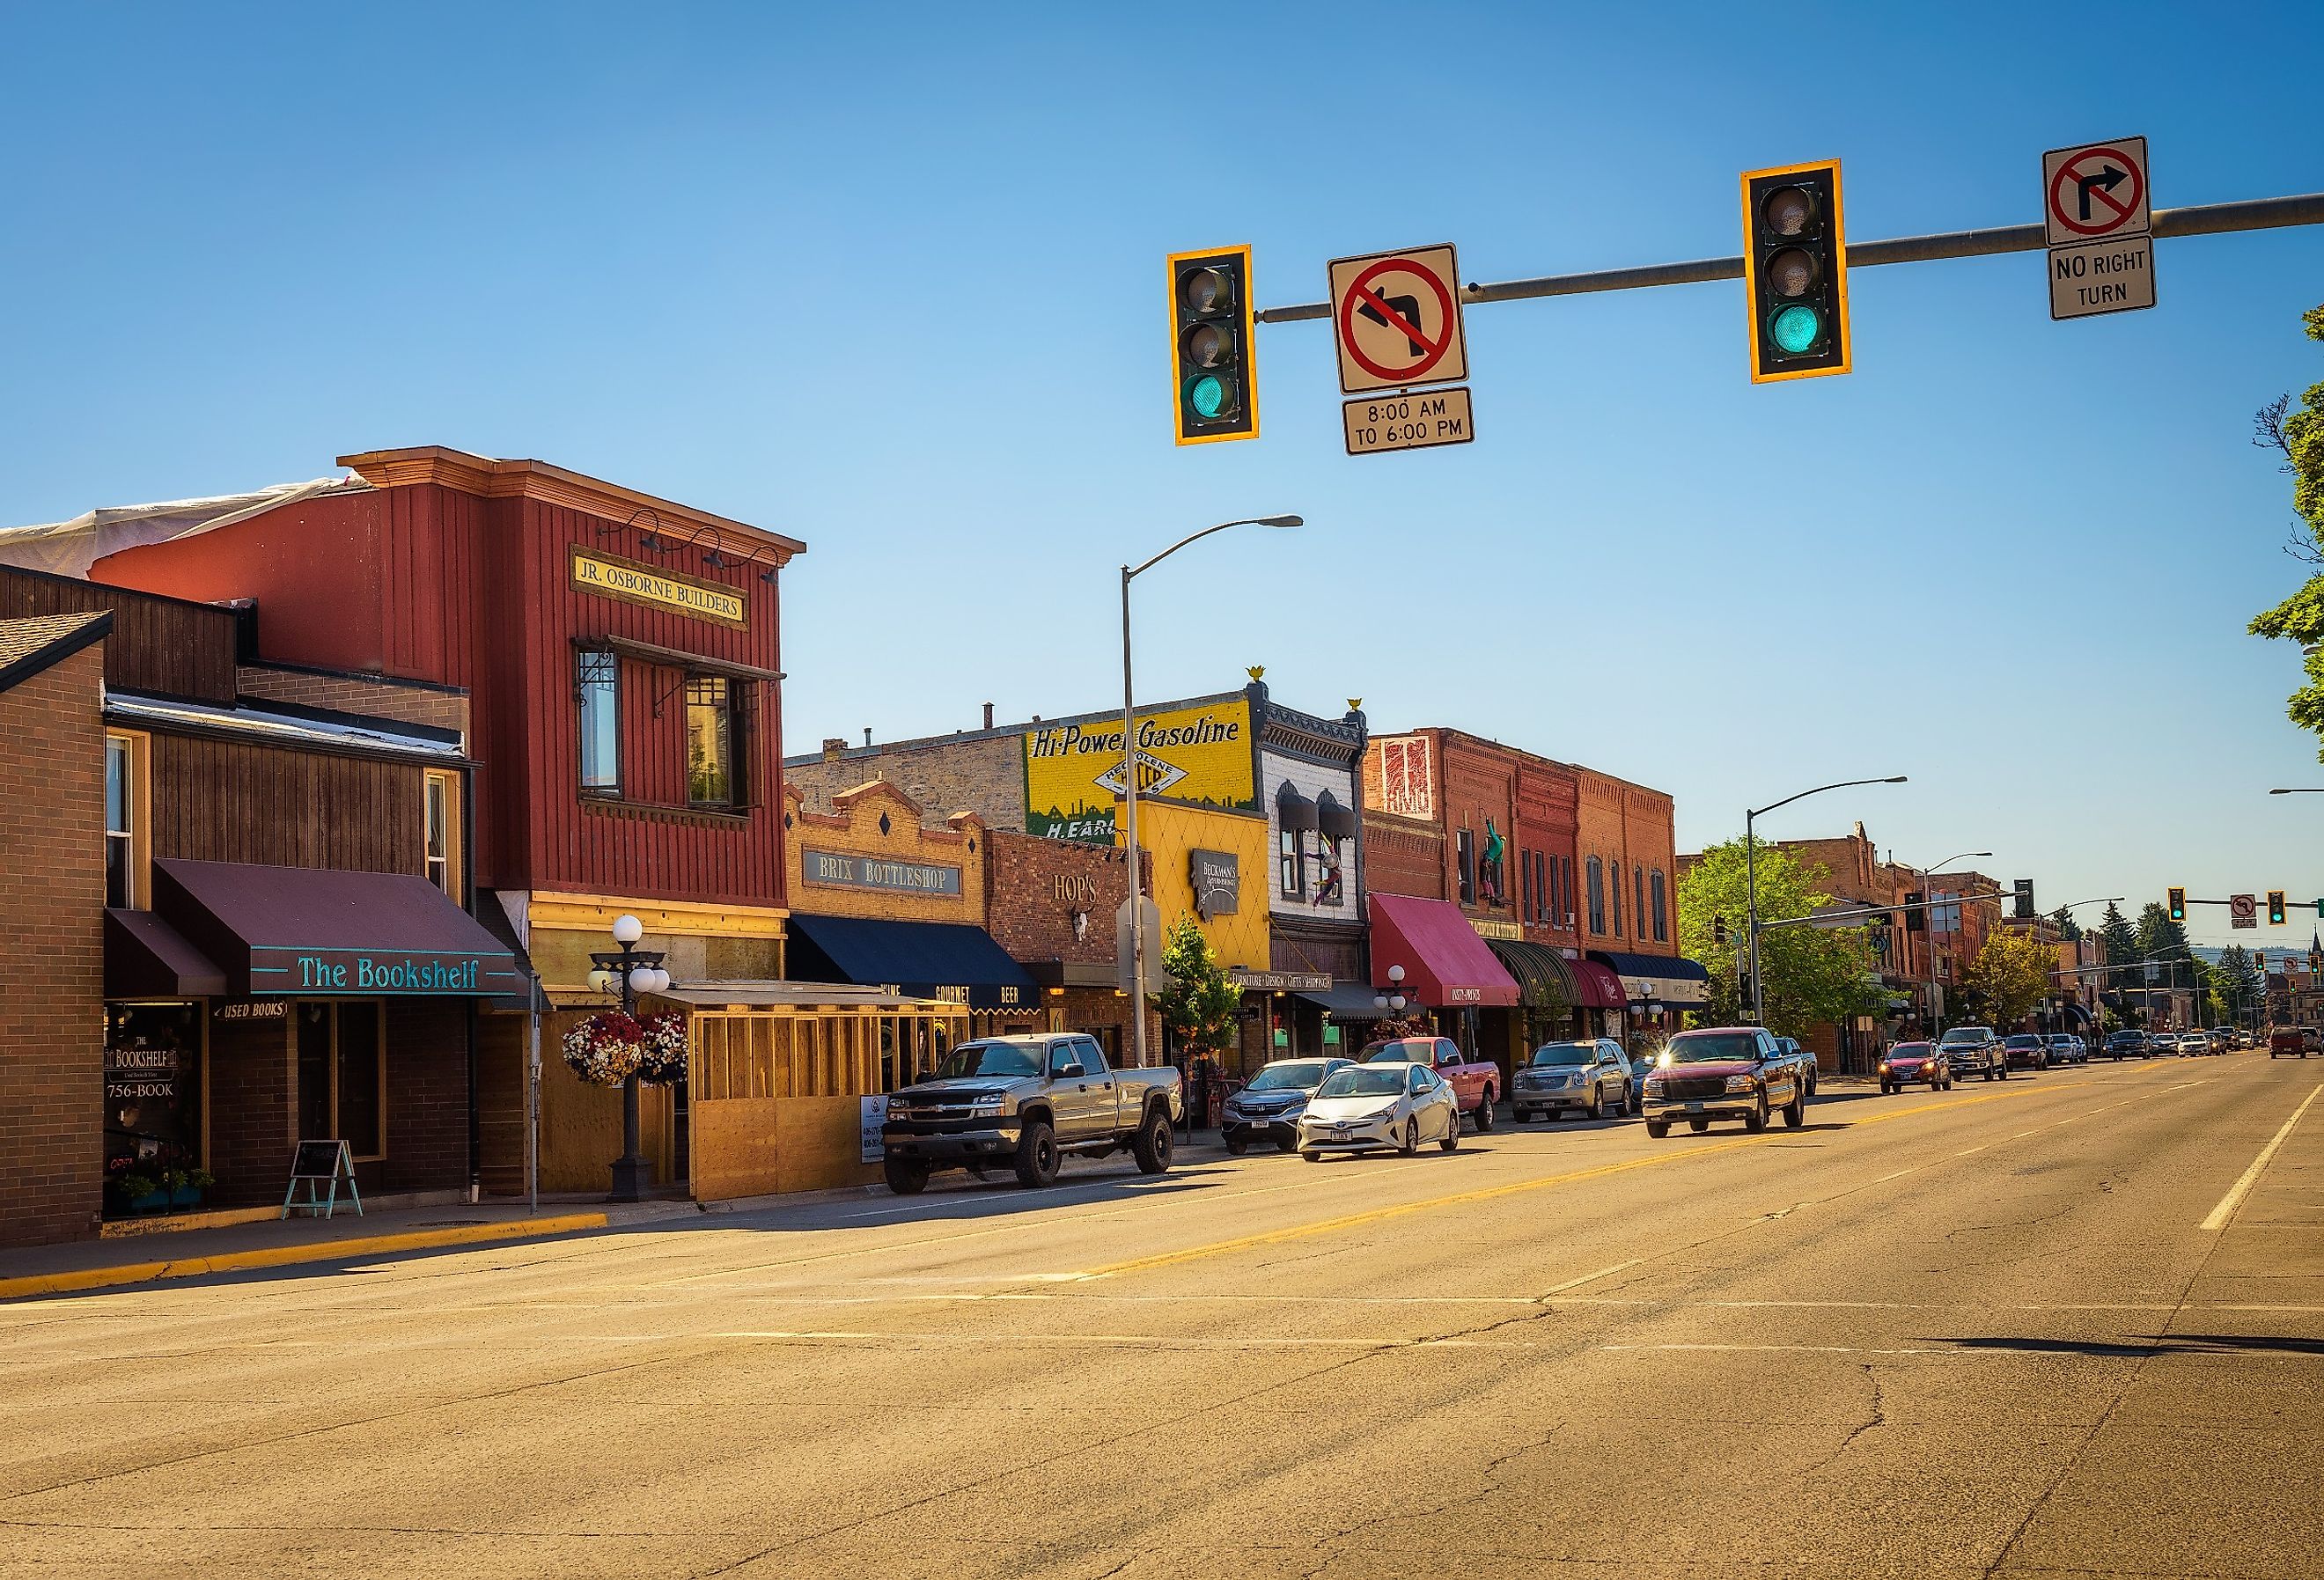 Scenic street view with shops and restaurants in Kalispell, Montana. Image credit Nick Fox via Shutterstock